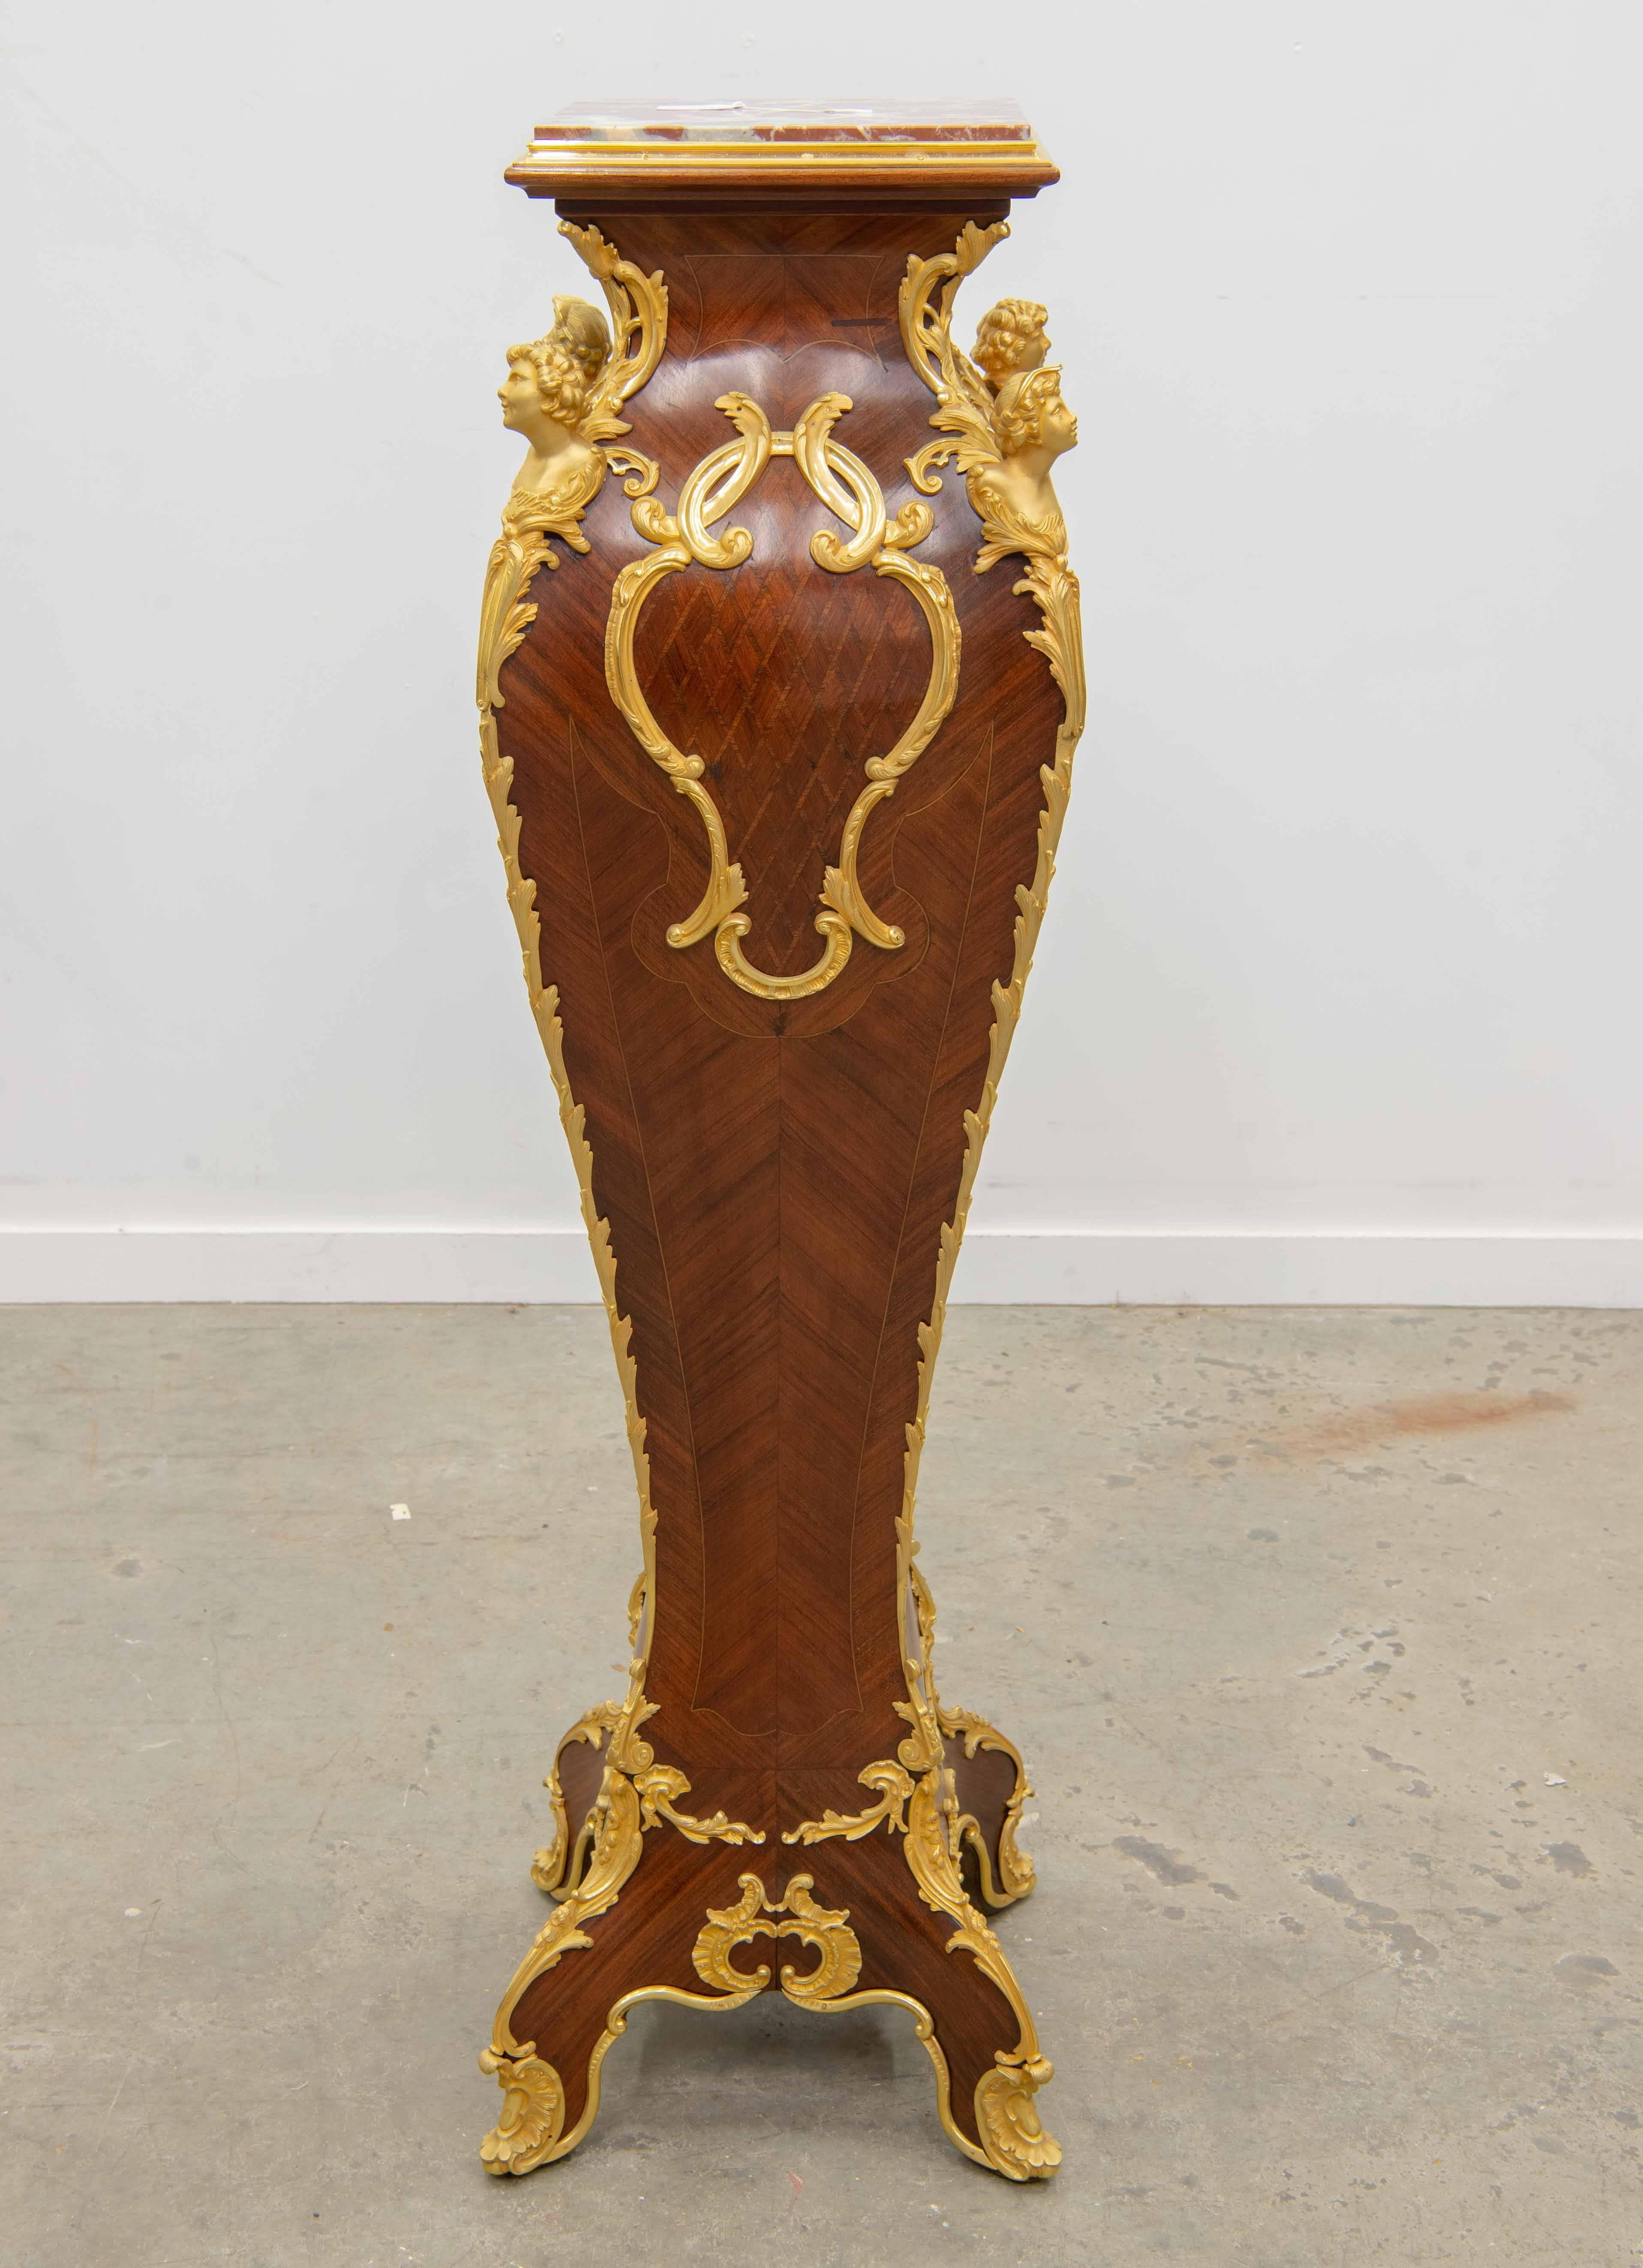 Fine and very nice Napoleon three style pedestal with marble top.
The pedestal is made of kingswood with marquetry inlay. It is also bronze-mounted with ormolu bronze figures and ornaments.
Overall condition is super. The gold is clean, the